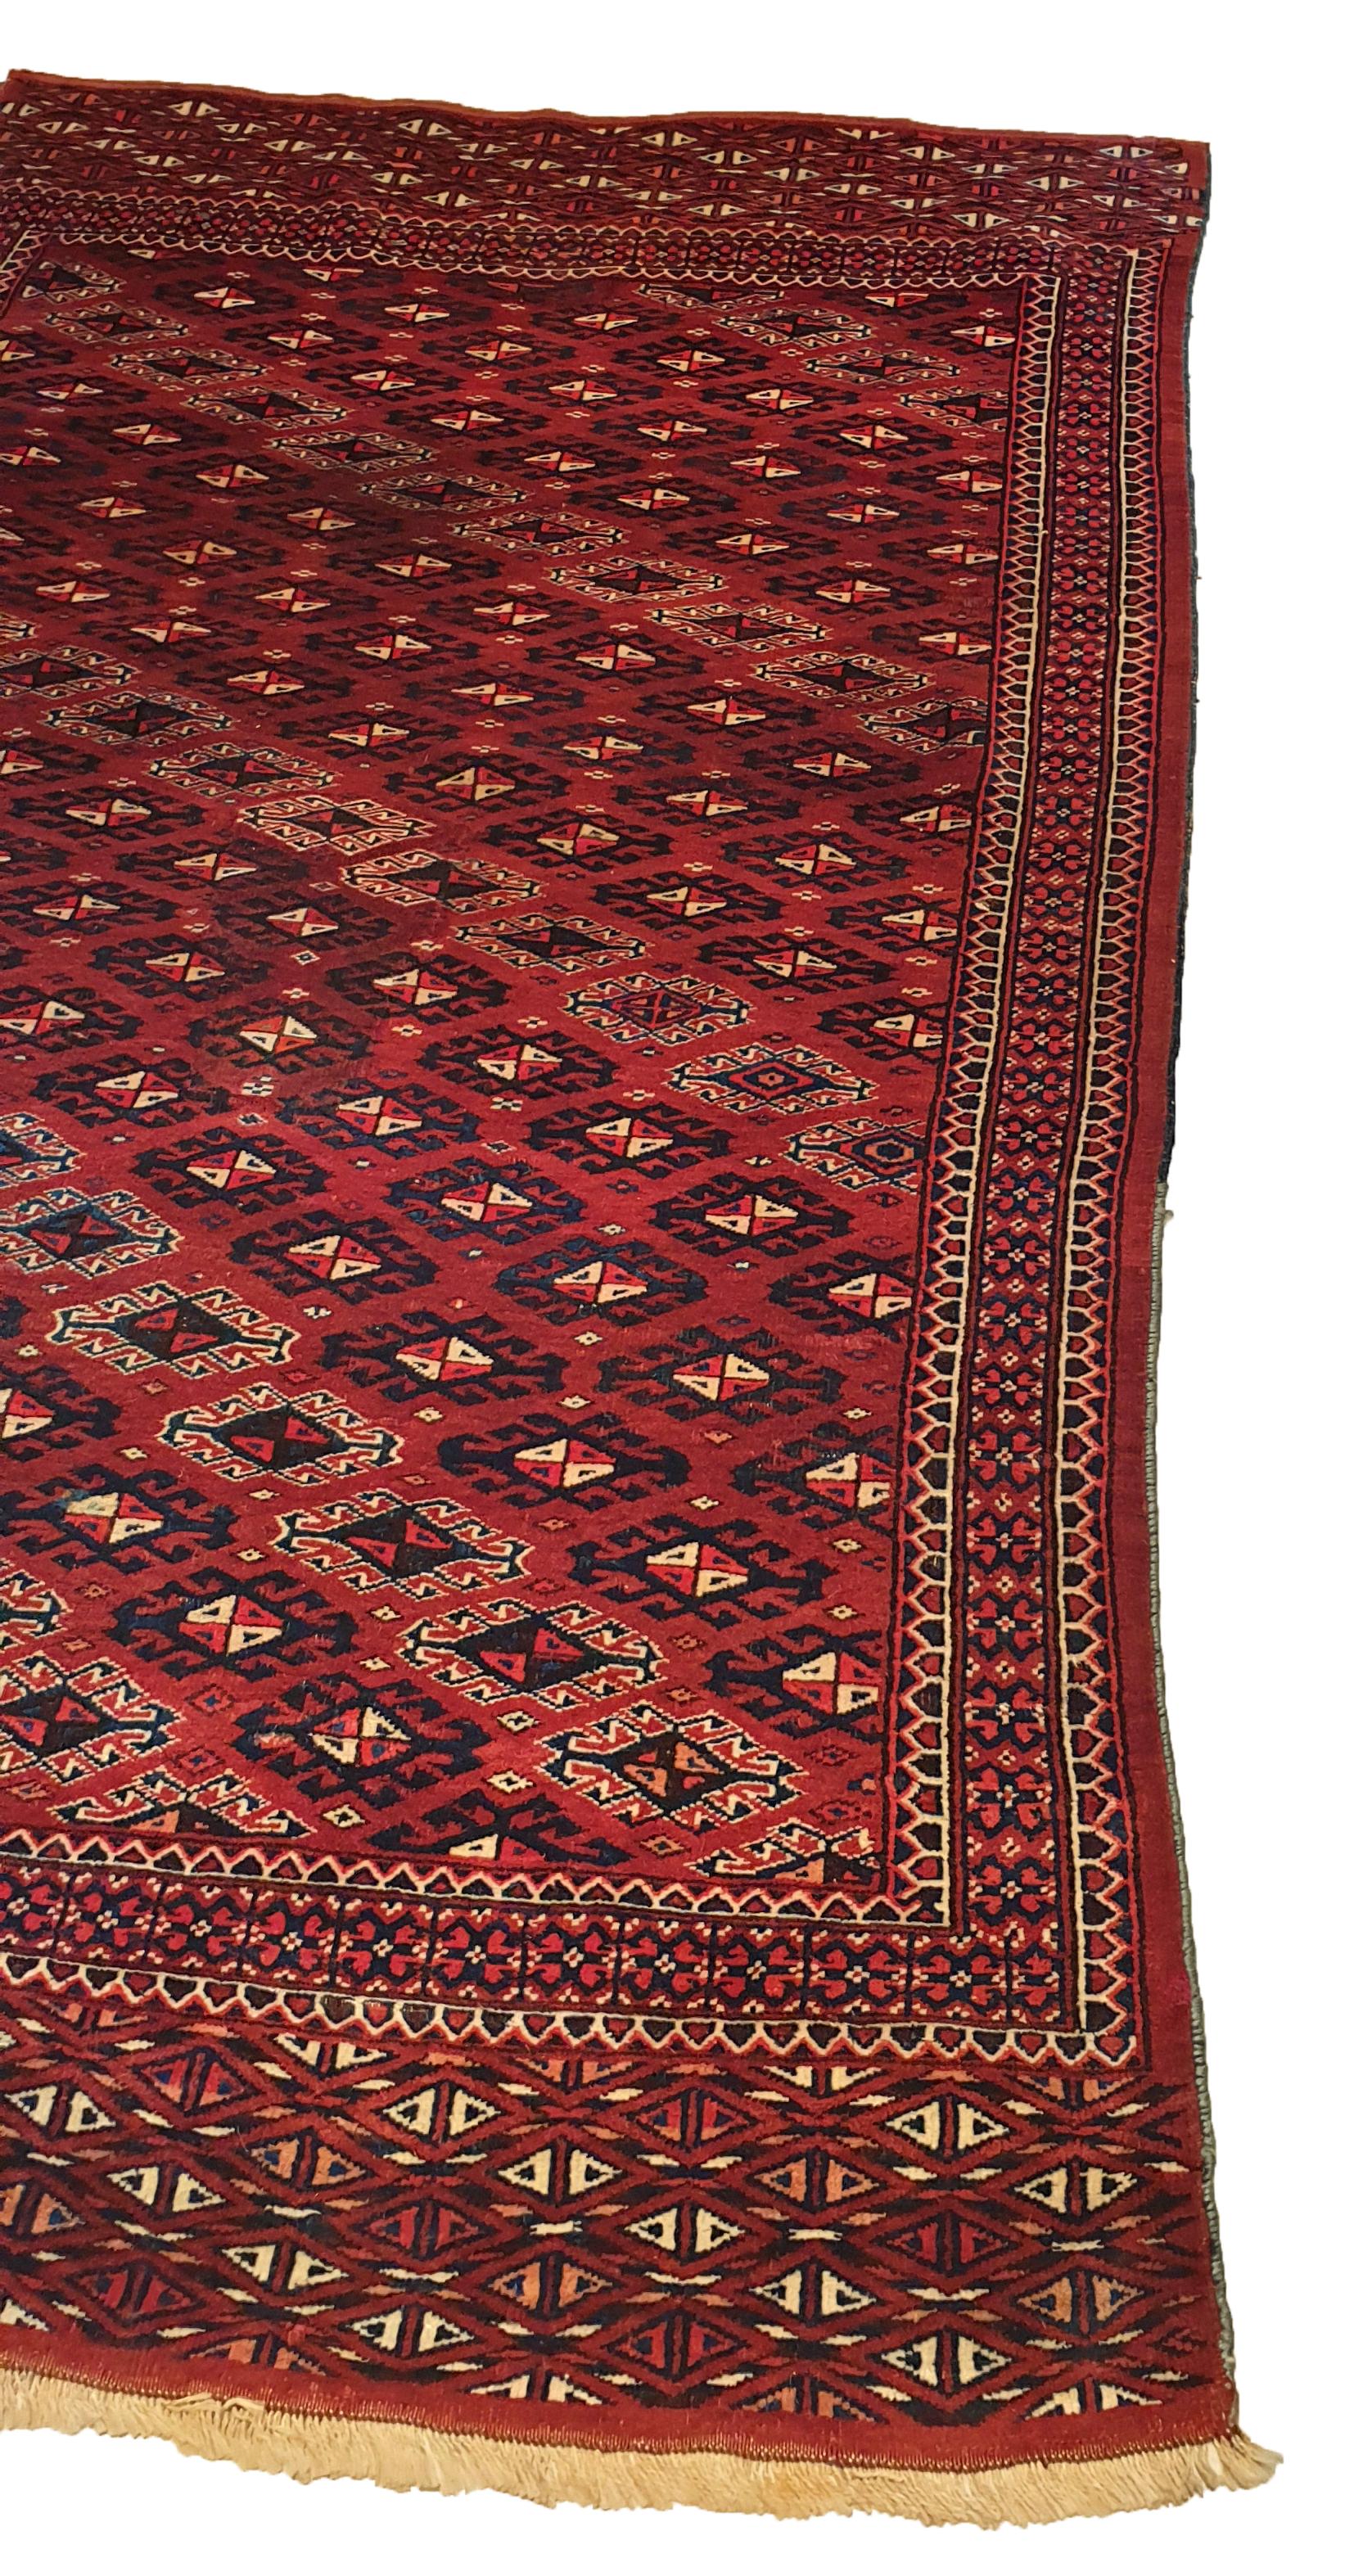 834 - very beautiful Turkmen carpet from the end of the 20th century with a nice Bukhara pattern with a beautiful Bukhara Guls and geometric design, and beautiful colors with red, orange, dark blue, green and black, entirely and finely hand-knotted